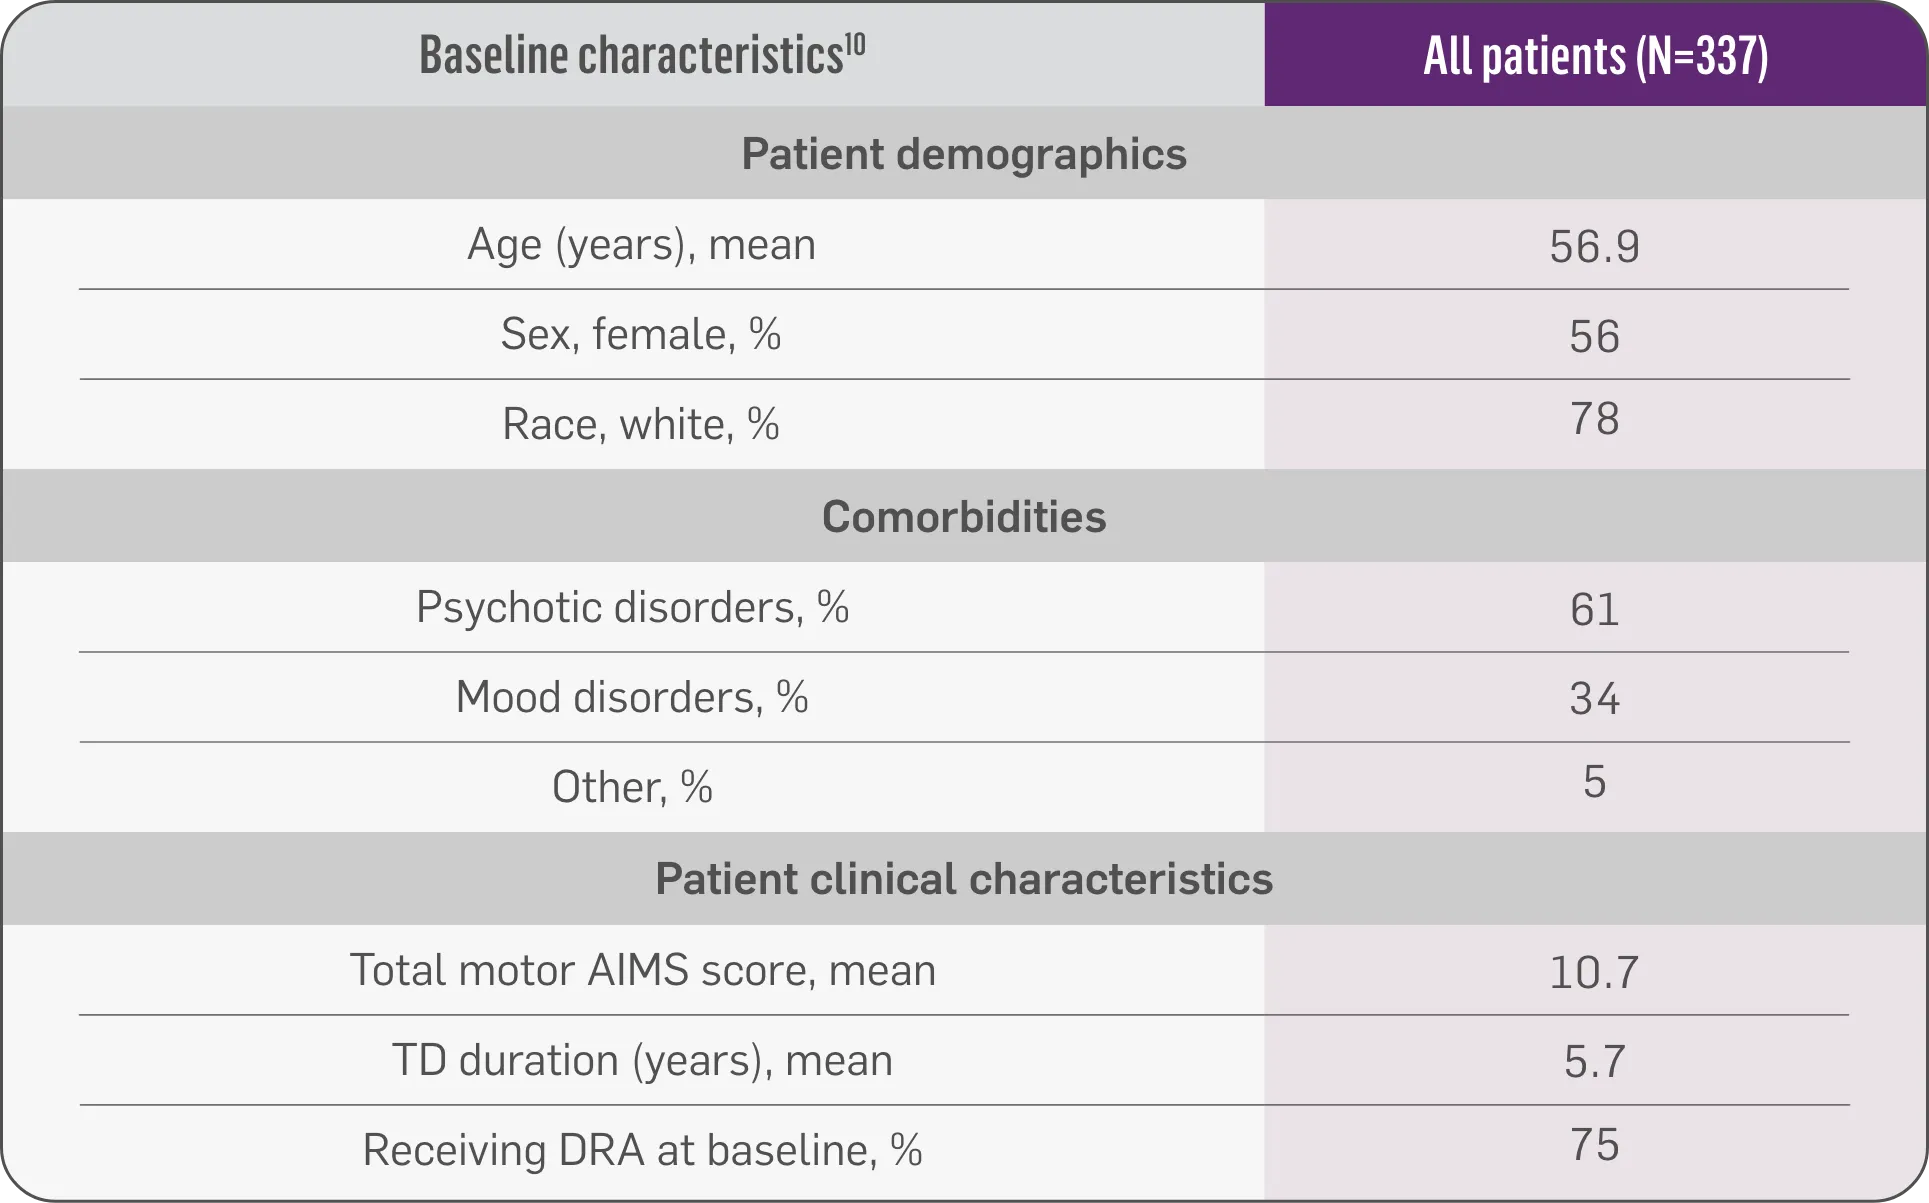 Table of baseline characteristics for the RIM-TD long-term study including patient demographics, comorbidities, and patient clinical characteristics.